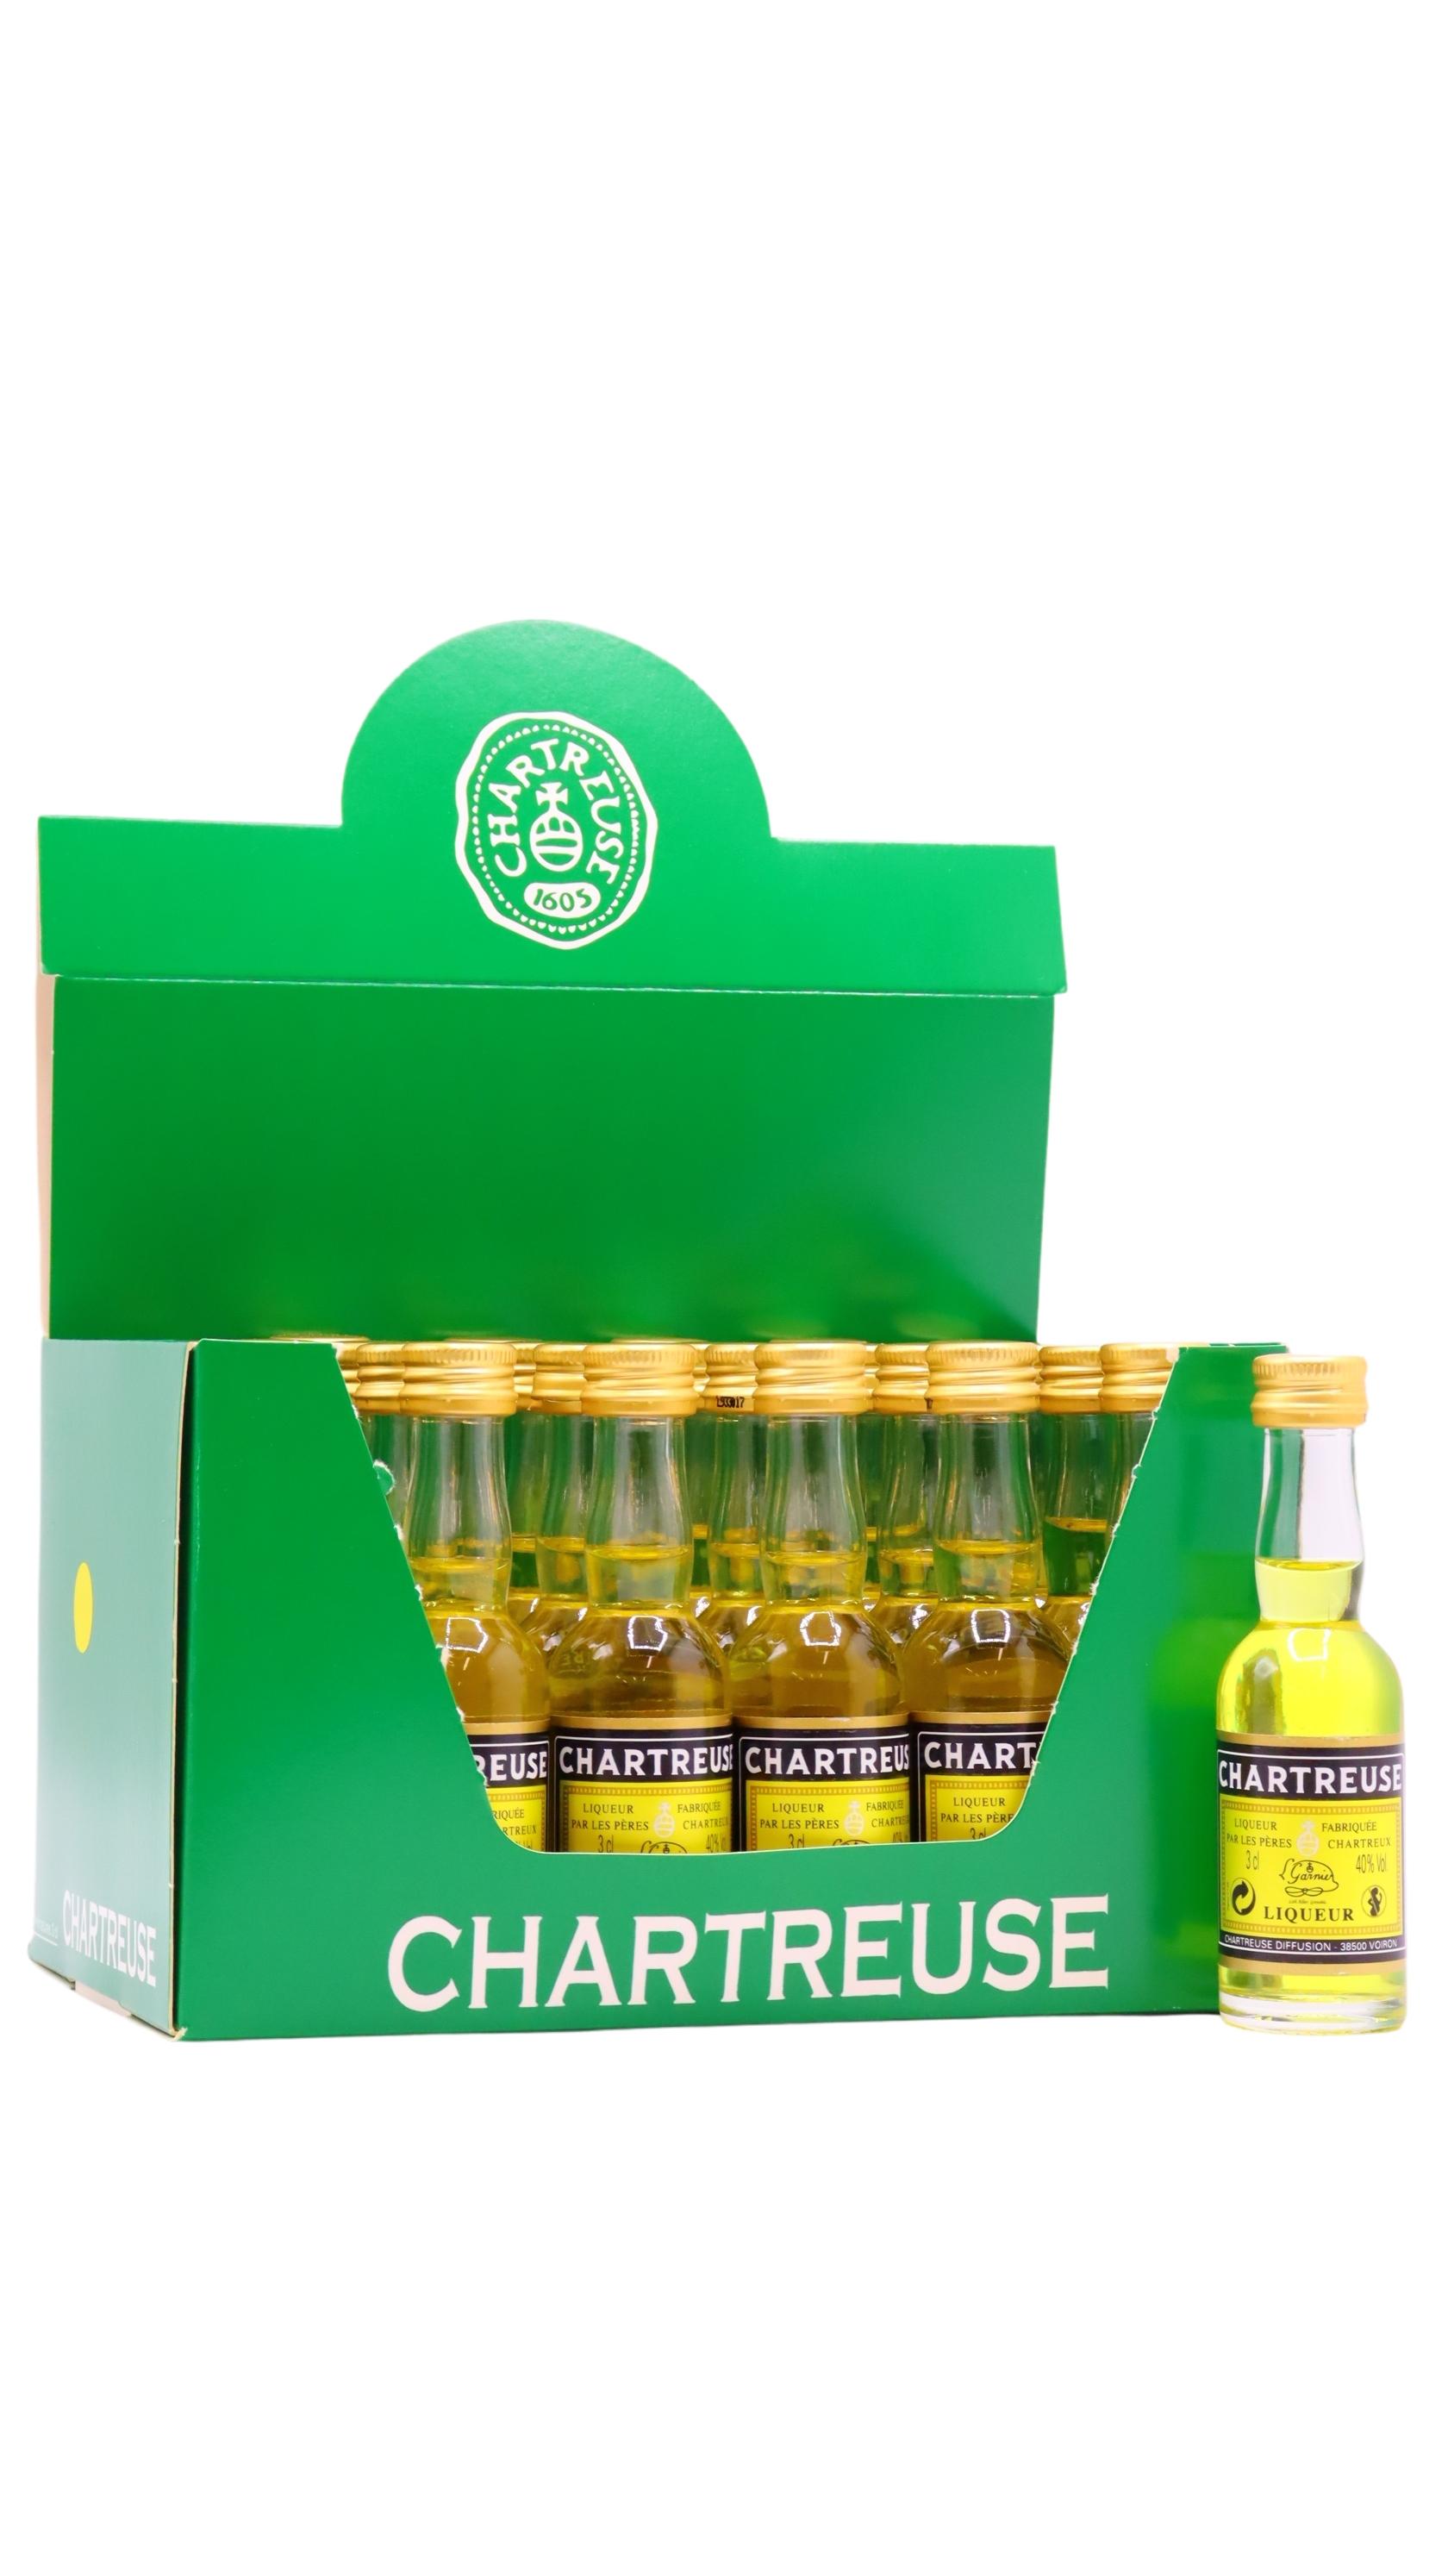 What is the buzz about Chartreuse? – Moodelier